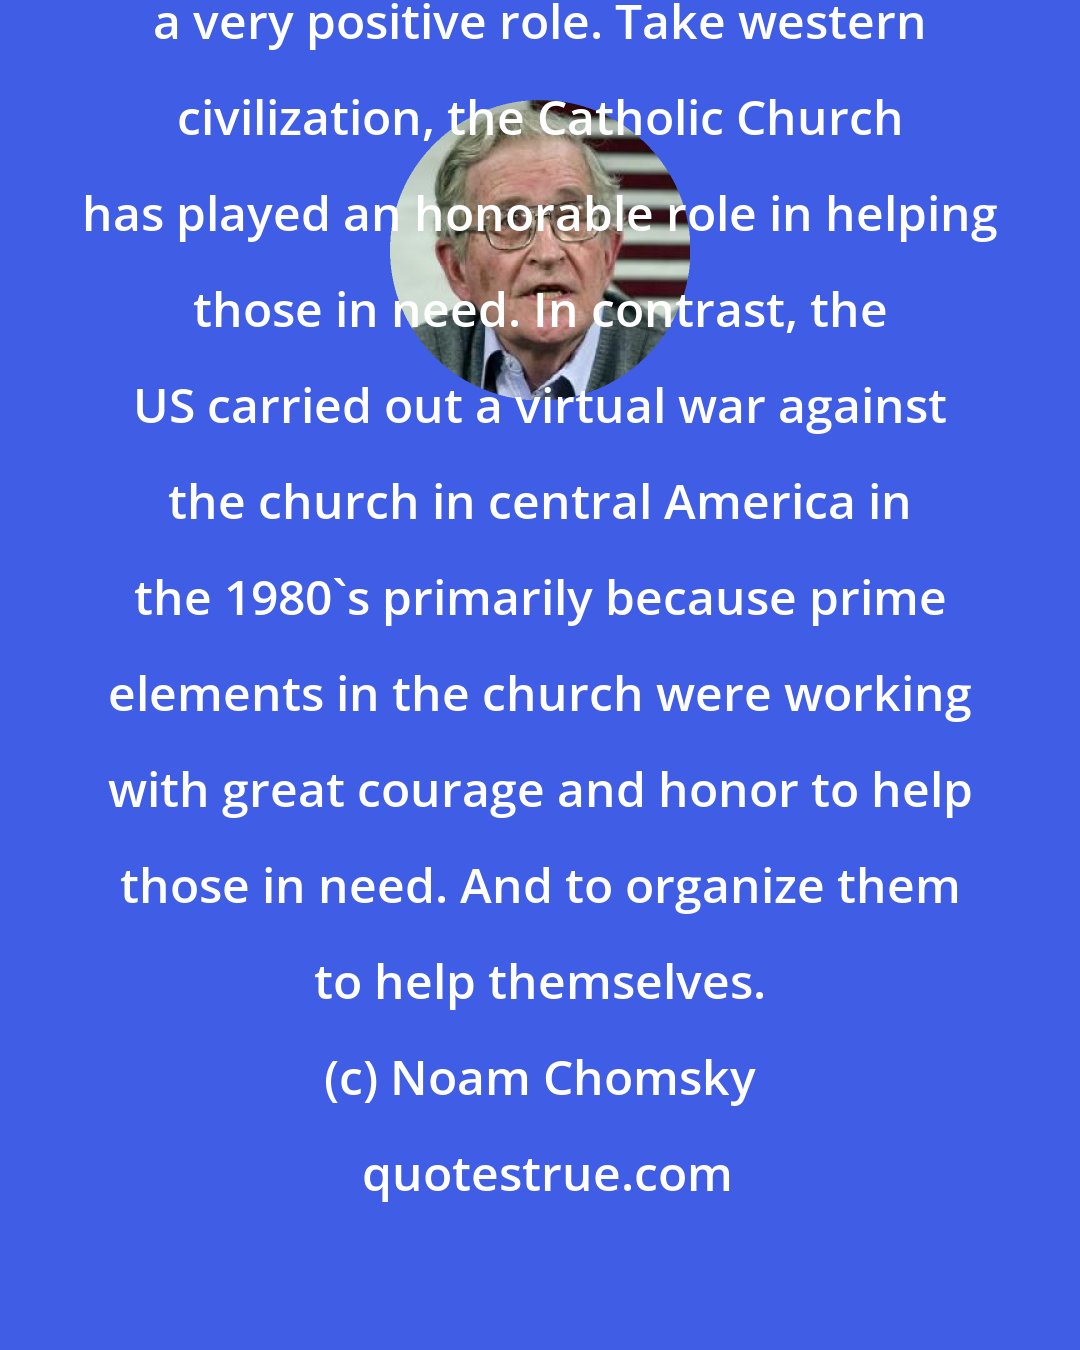 Noam Chomsky: I think religion has often played a very positive role. Take western civilization, the Catholic Church has played an honorable role in helping those in need. In contrast, the US carried out a virtual war against the church in central America in the 1980's primarily because prime elements in the church were working with great courage and honor to help those in need. And to organize them to help themselves.